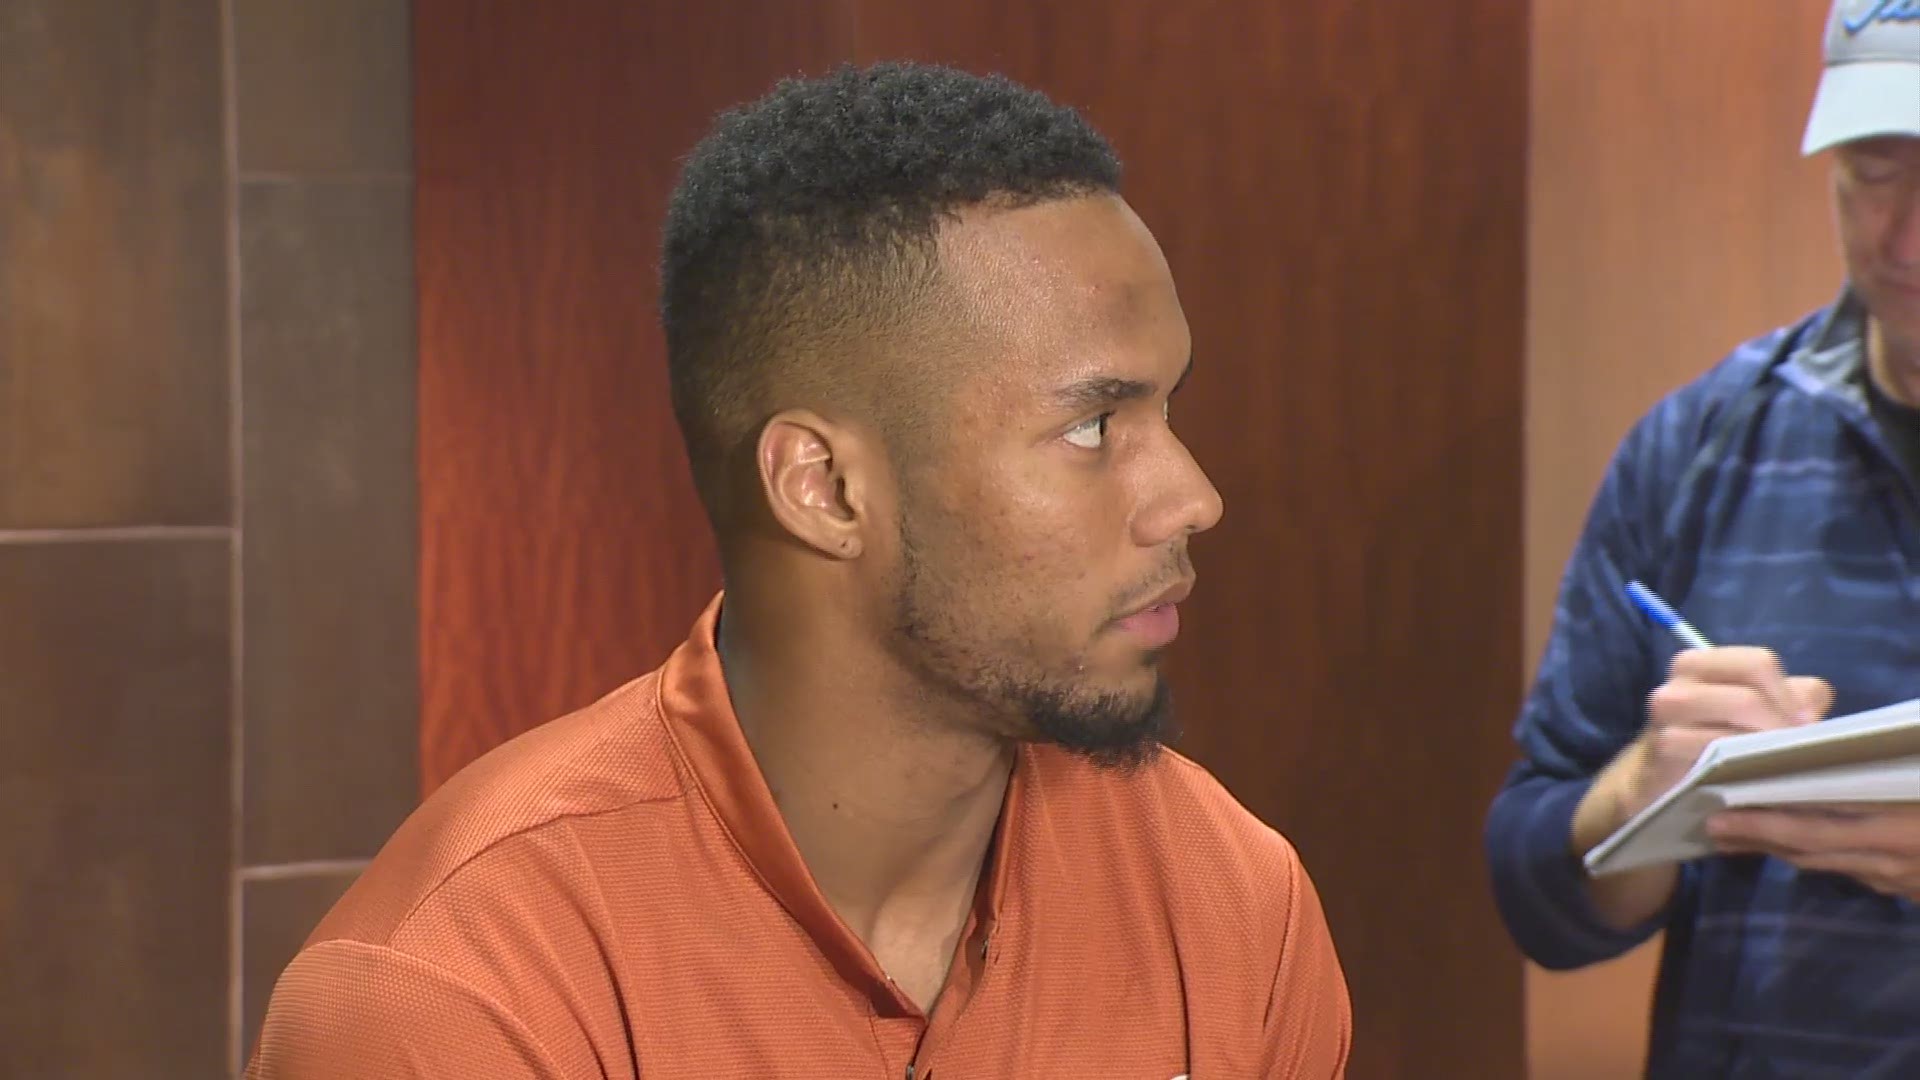 Teammate Collin Johnson affirms Buechele's readiness if called upon.